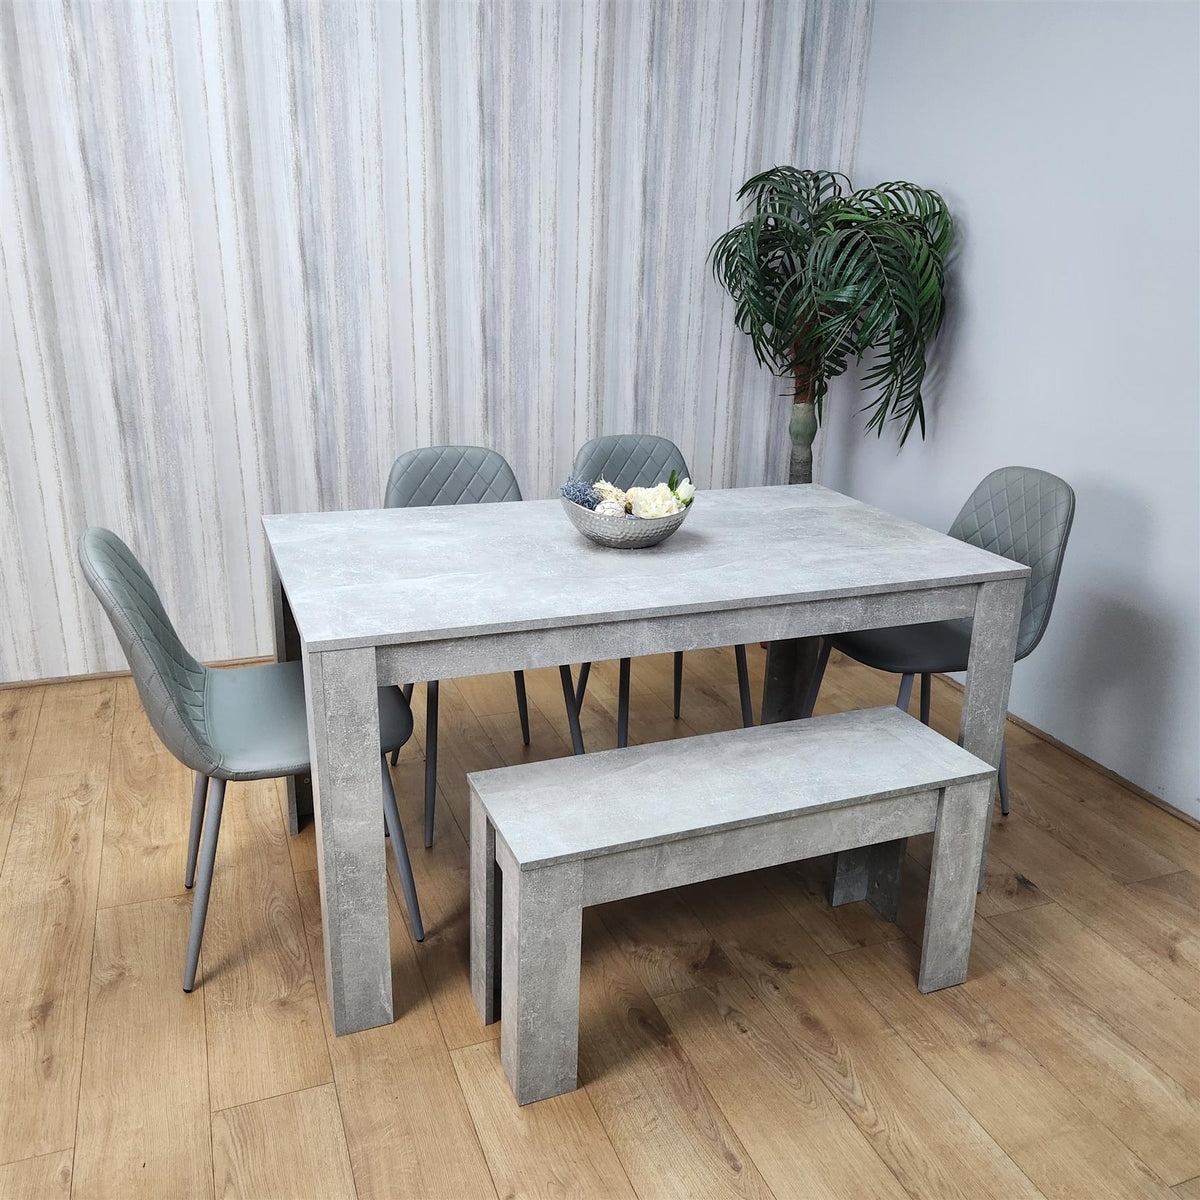 Wooden Rectangle Dining Table Sets with Set of 4 Chairs, a Bench, Grey